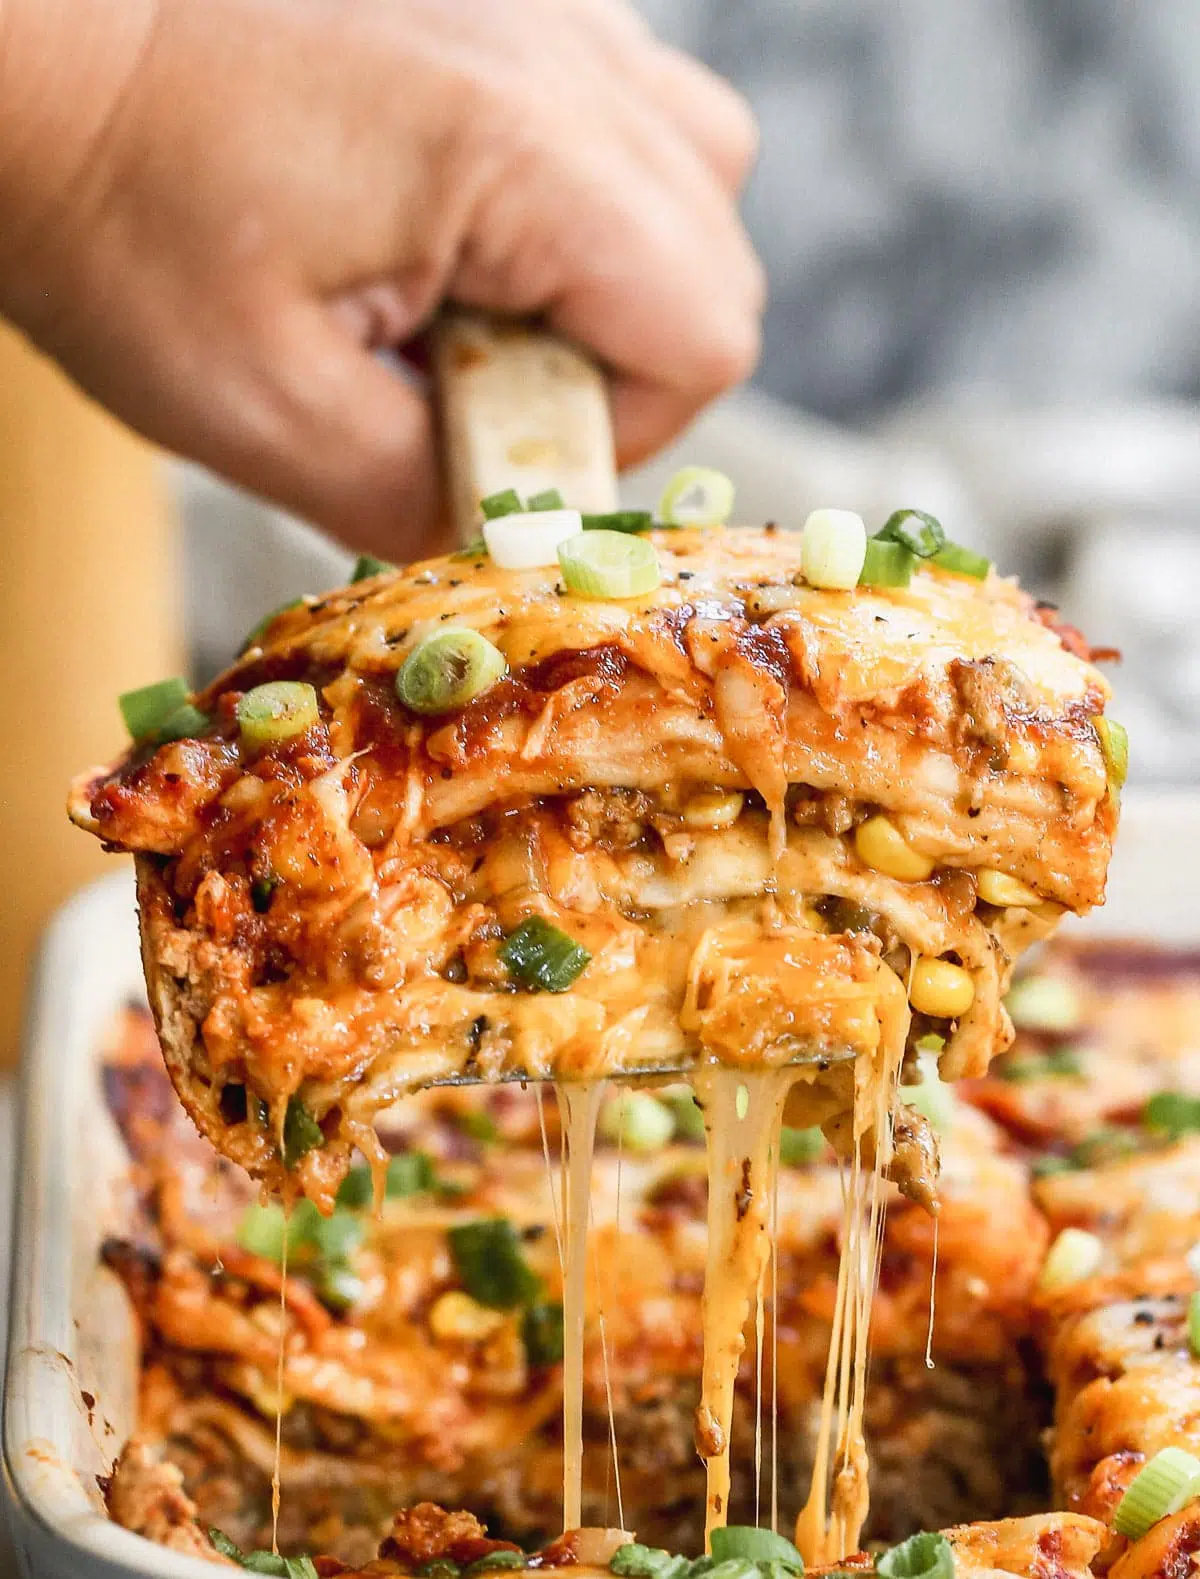 Packed with ground chicken or turkey, plenty of veggies, and an easy homemade enchilada sauce, our Chicken Enchilada Casserole is the perfect way to get your enchilada fix in an easier form. Make a day in advance and pop in the oven when you're ready to eat.&nbsp;